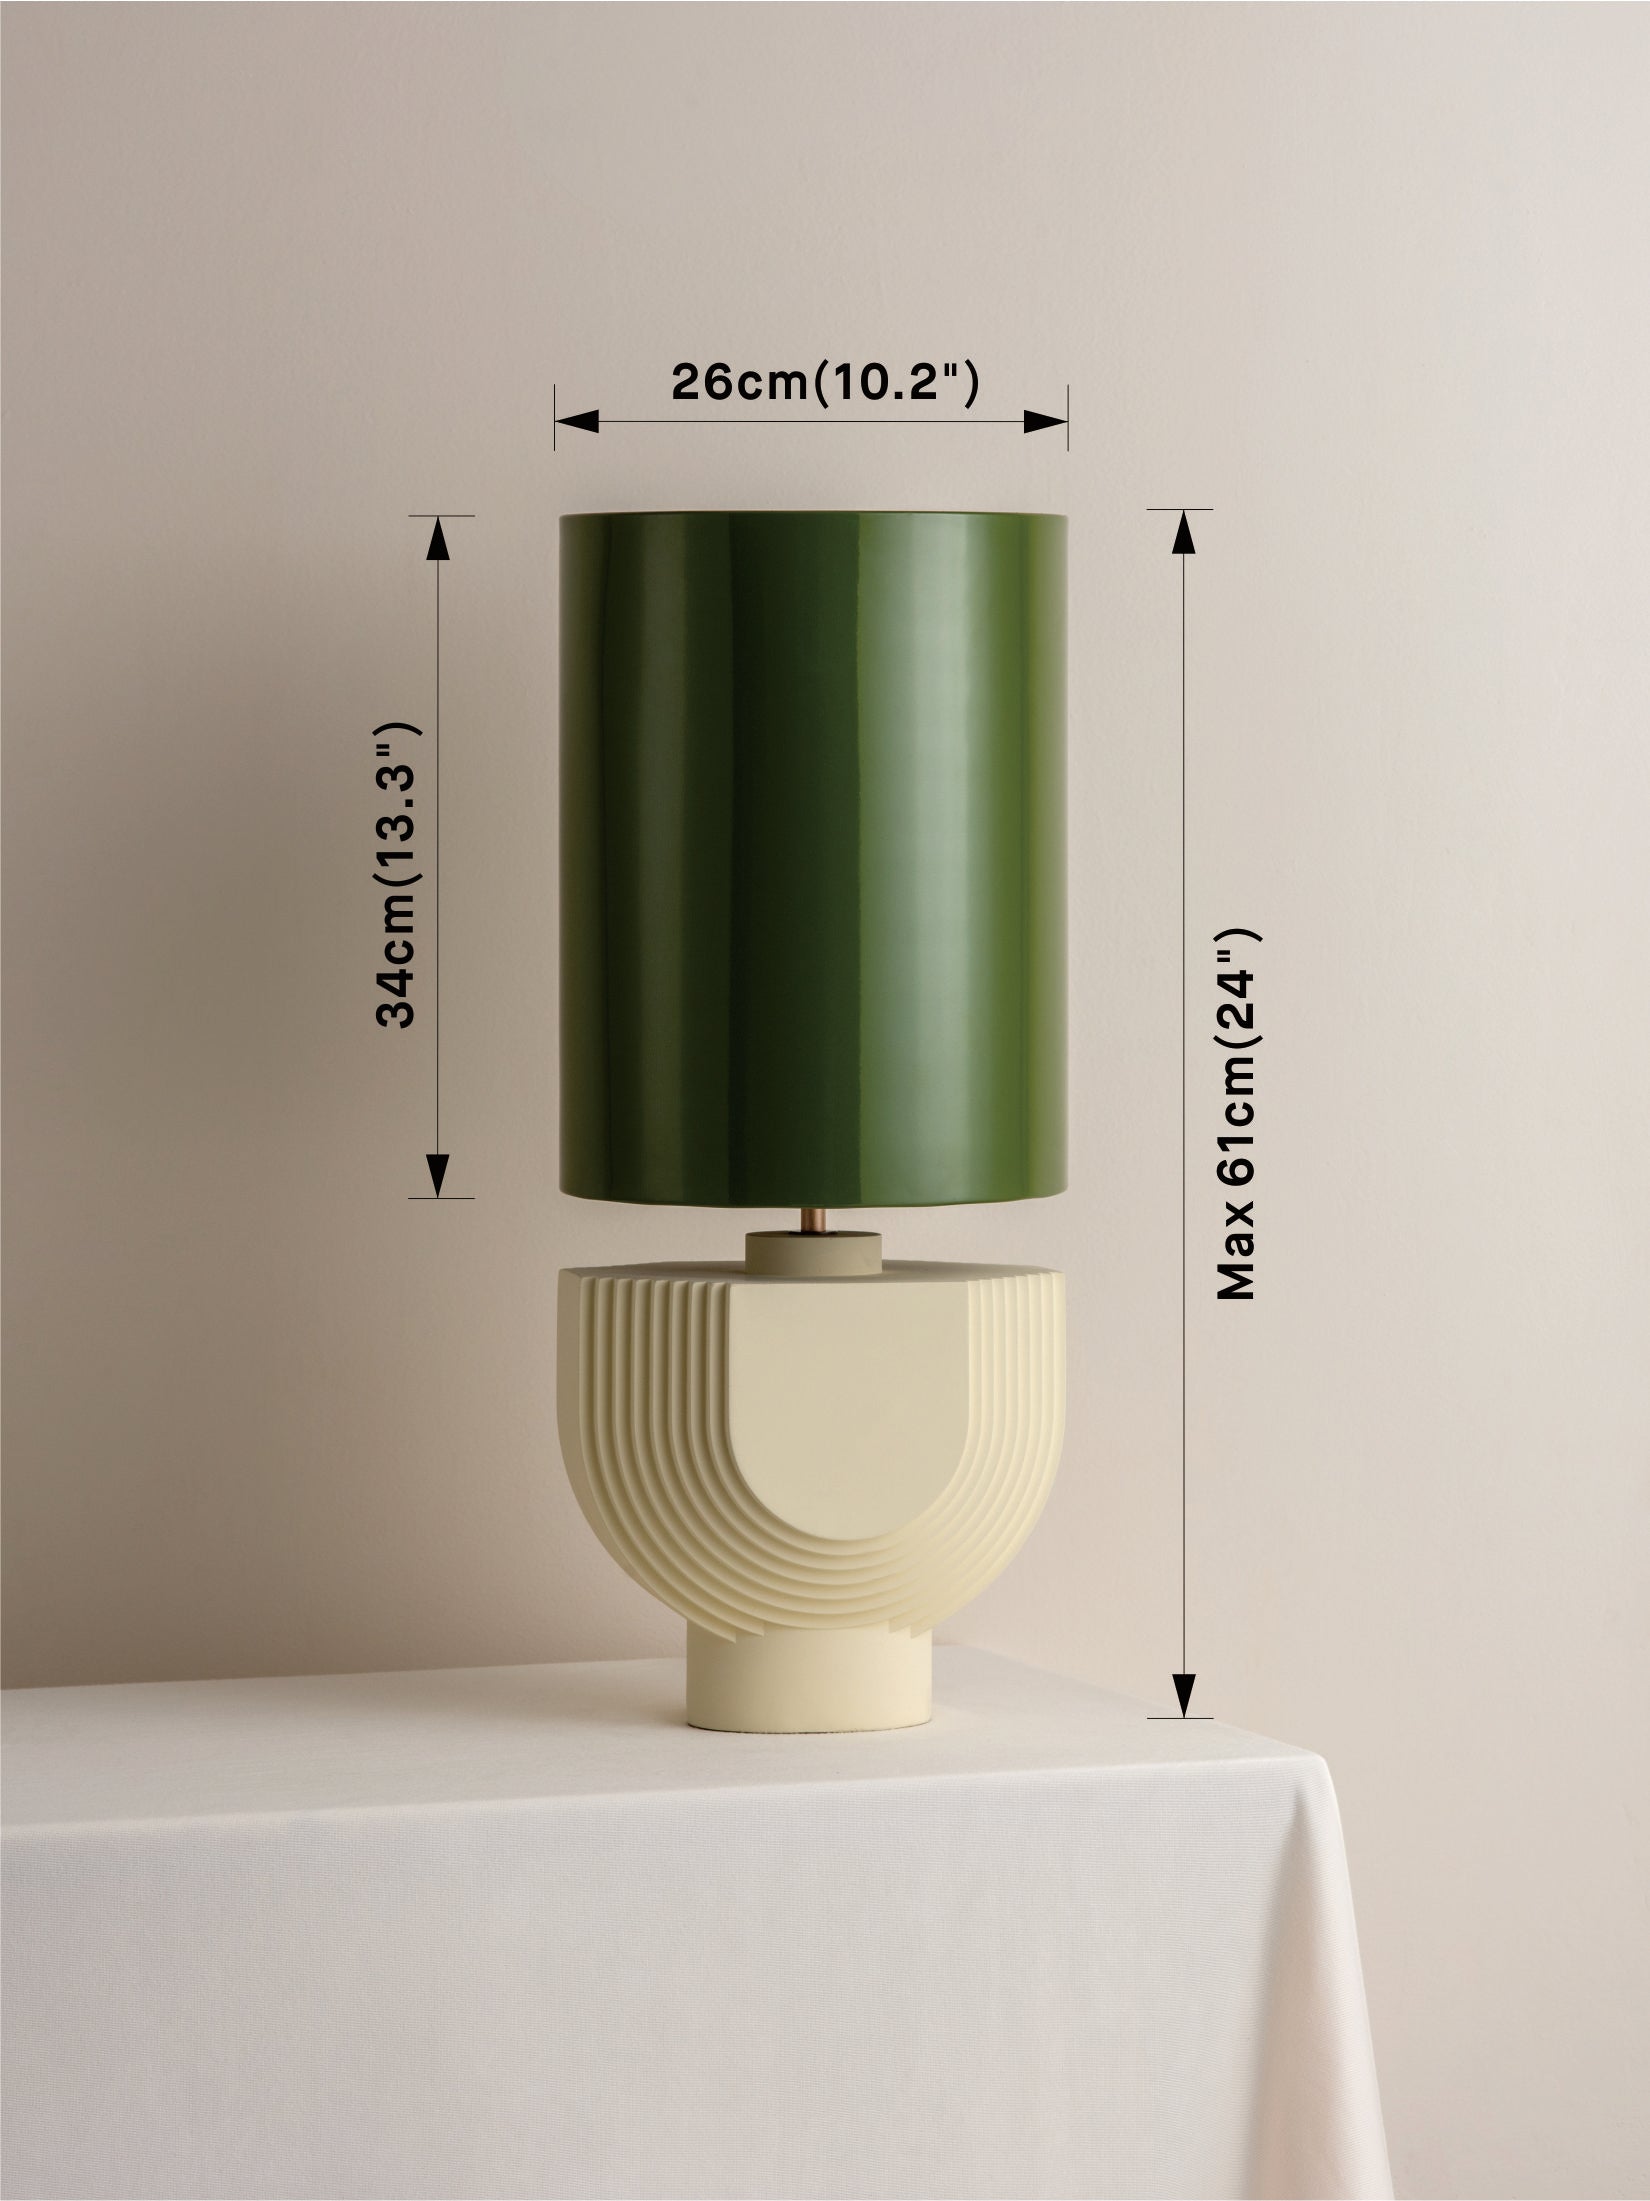 Editions concrete lamp with + green lacquer shade | Table Lamp | Lights & Lamps | UK | Modern Affordable Designer Lighting